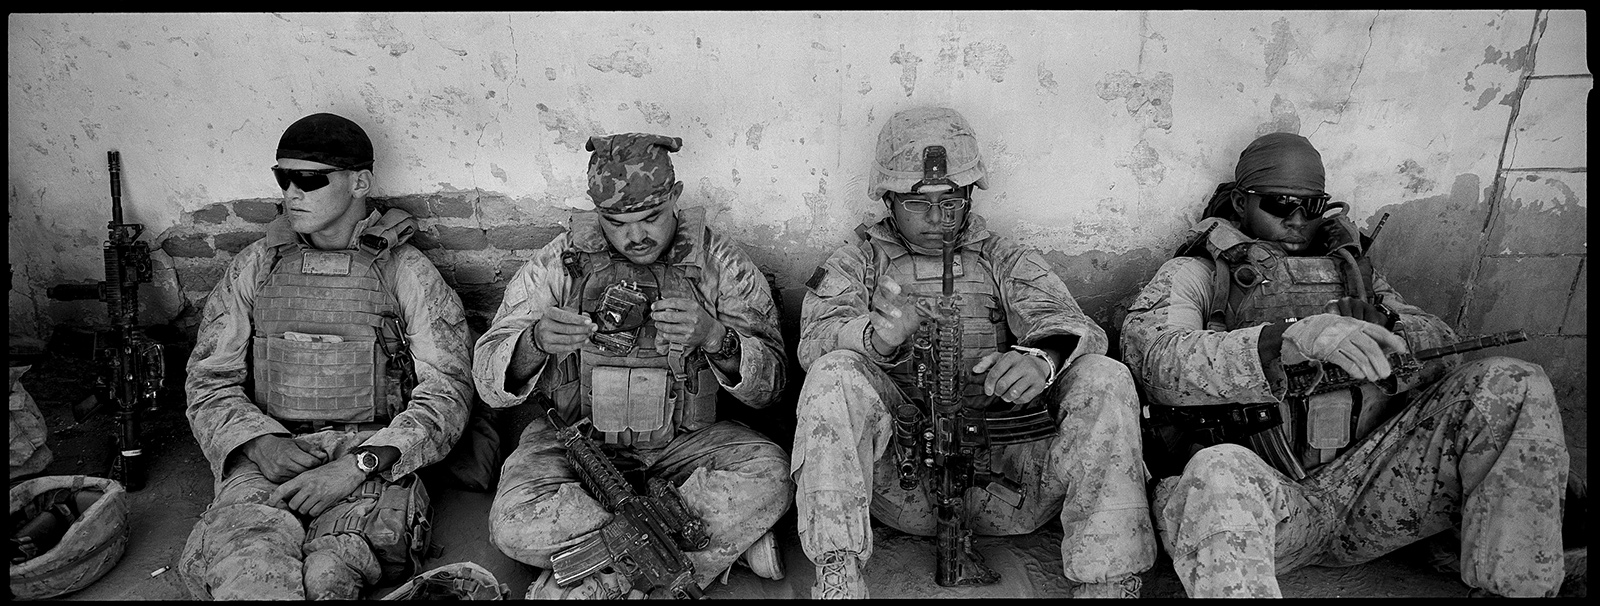 US Marines about to go on patrol in Khan Neshin, Helmand province, Afghanistan, 2009; photograph by Stephen Dupont from his book Generation AK: The Afghanistan Wars 1993–2012, published last fall by Steidl